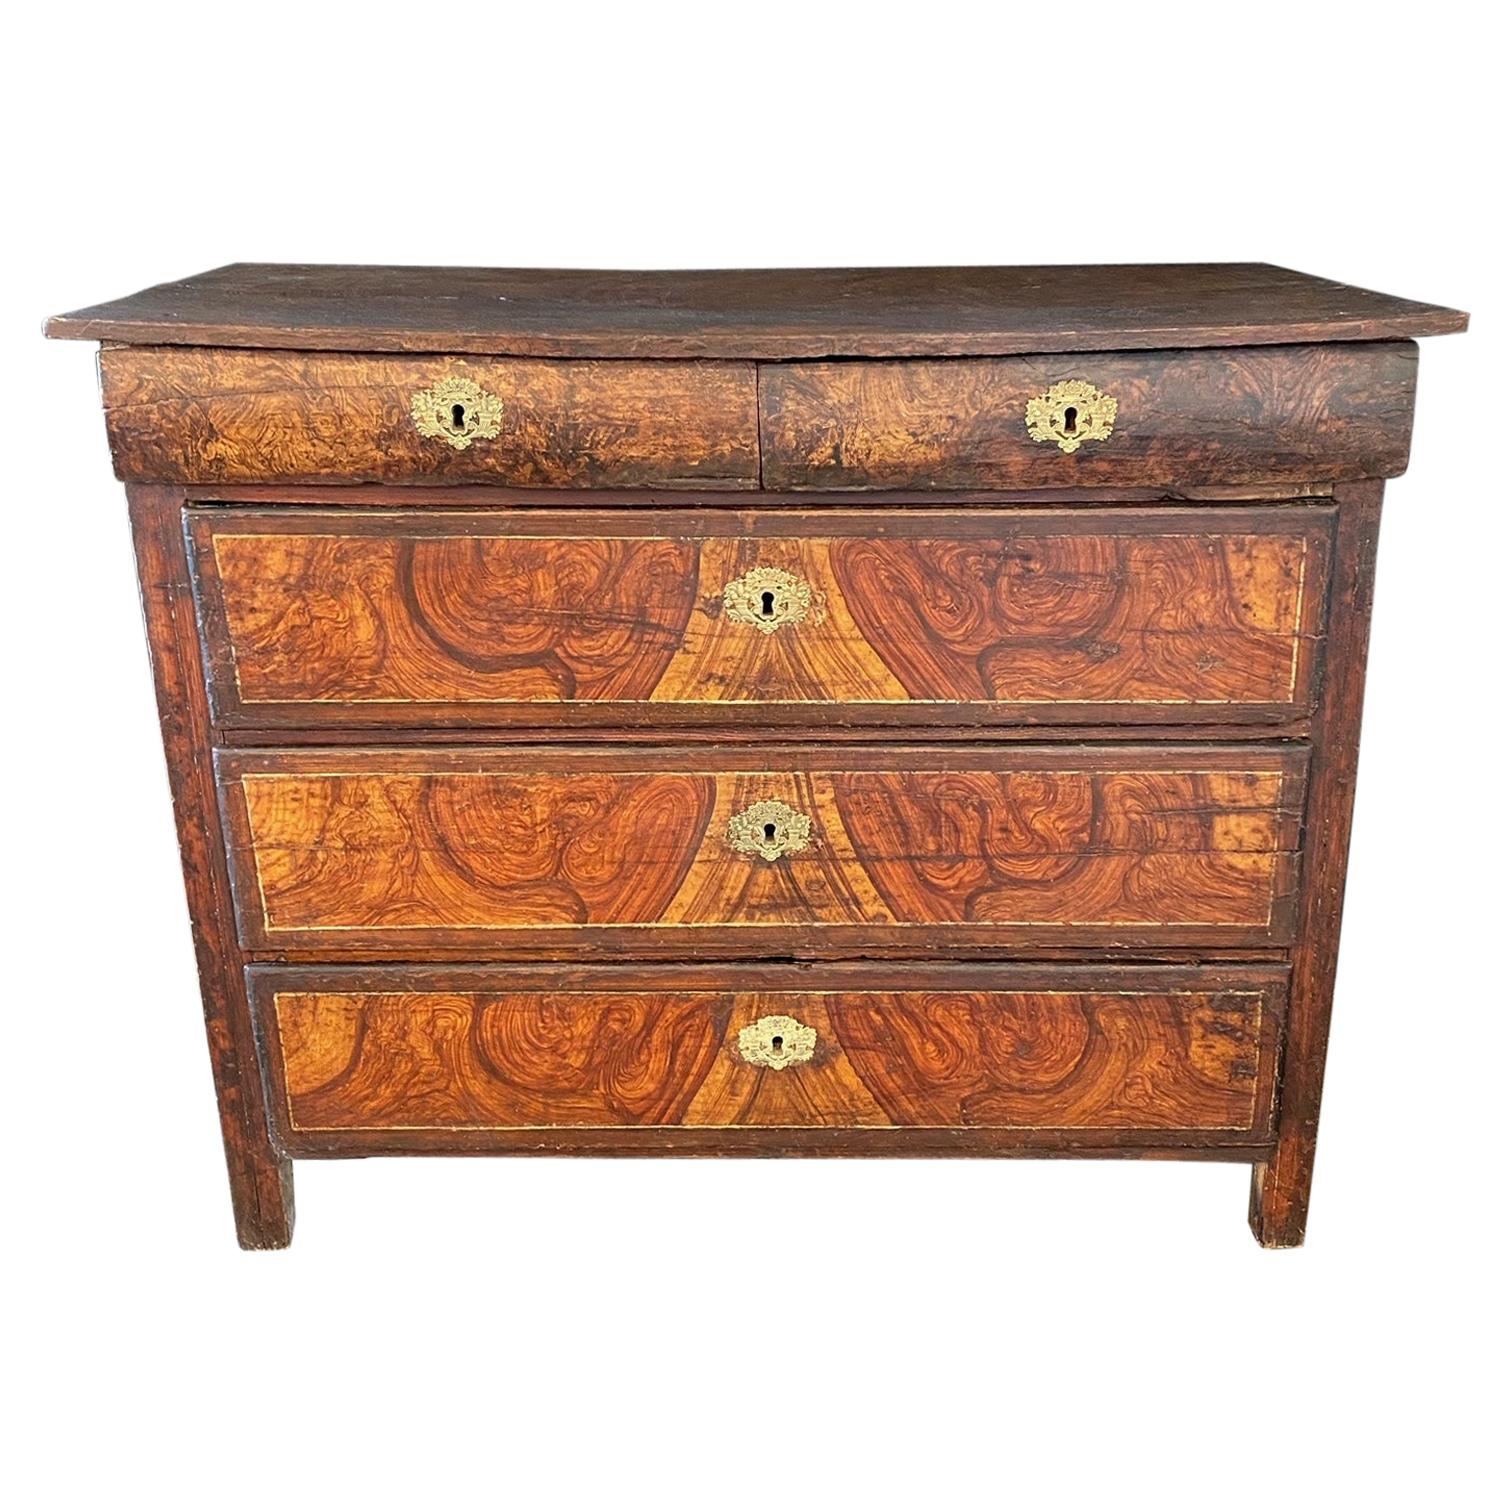 Fantastic French 18th Century Faux Grain Painted Commode Chest of Drawers